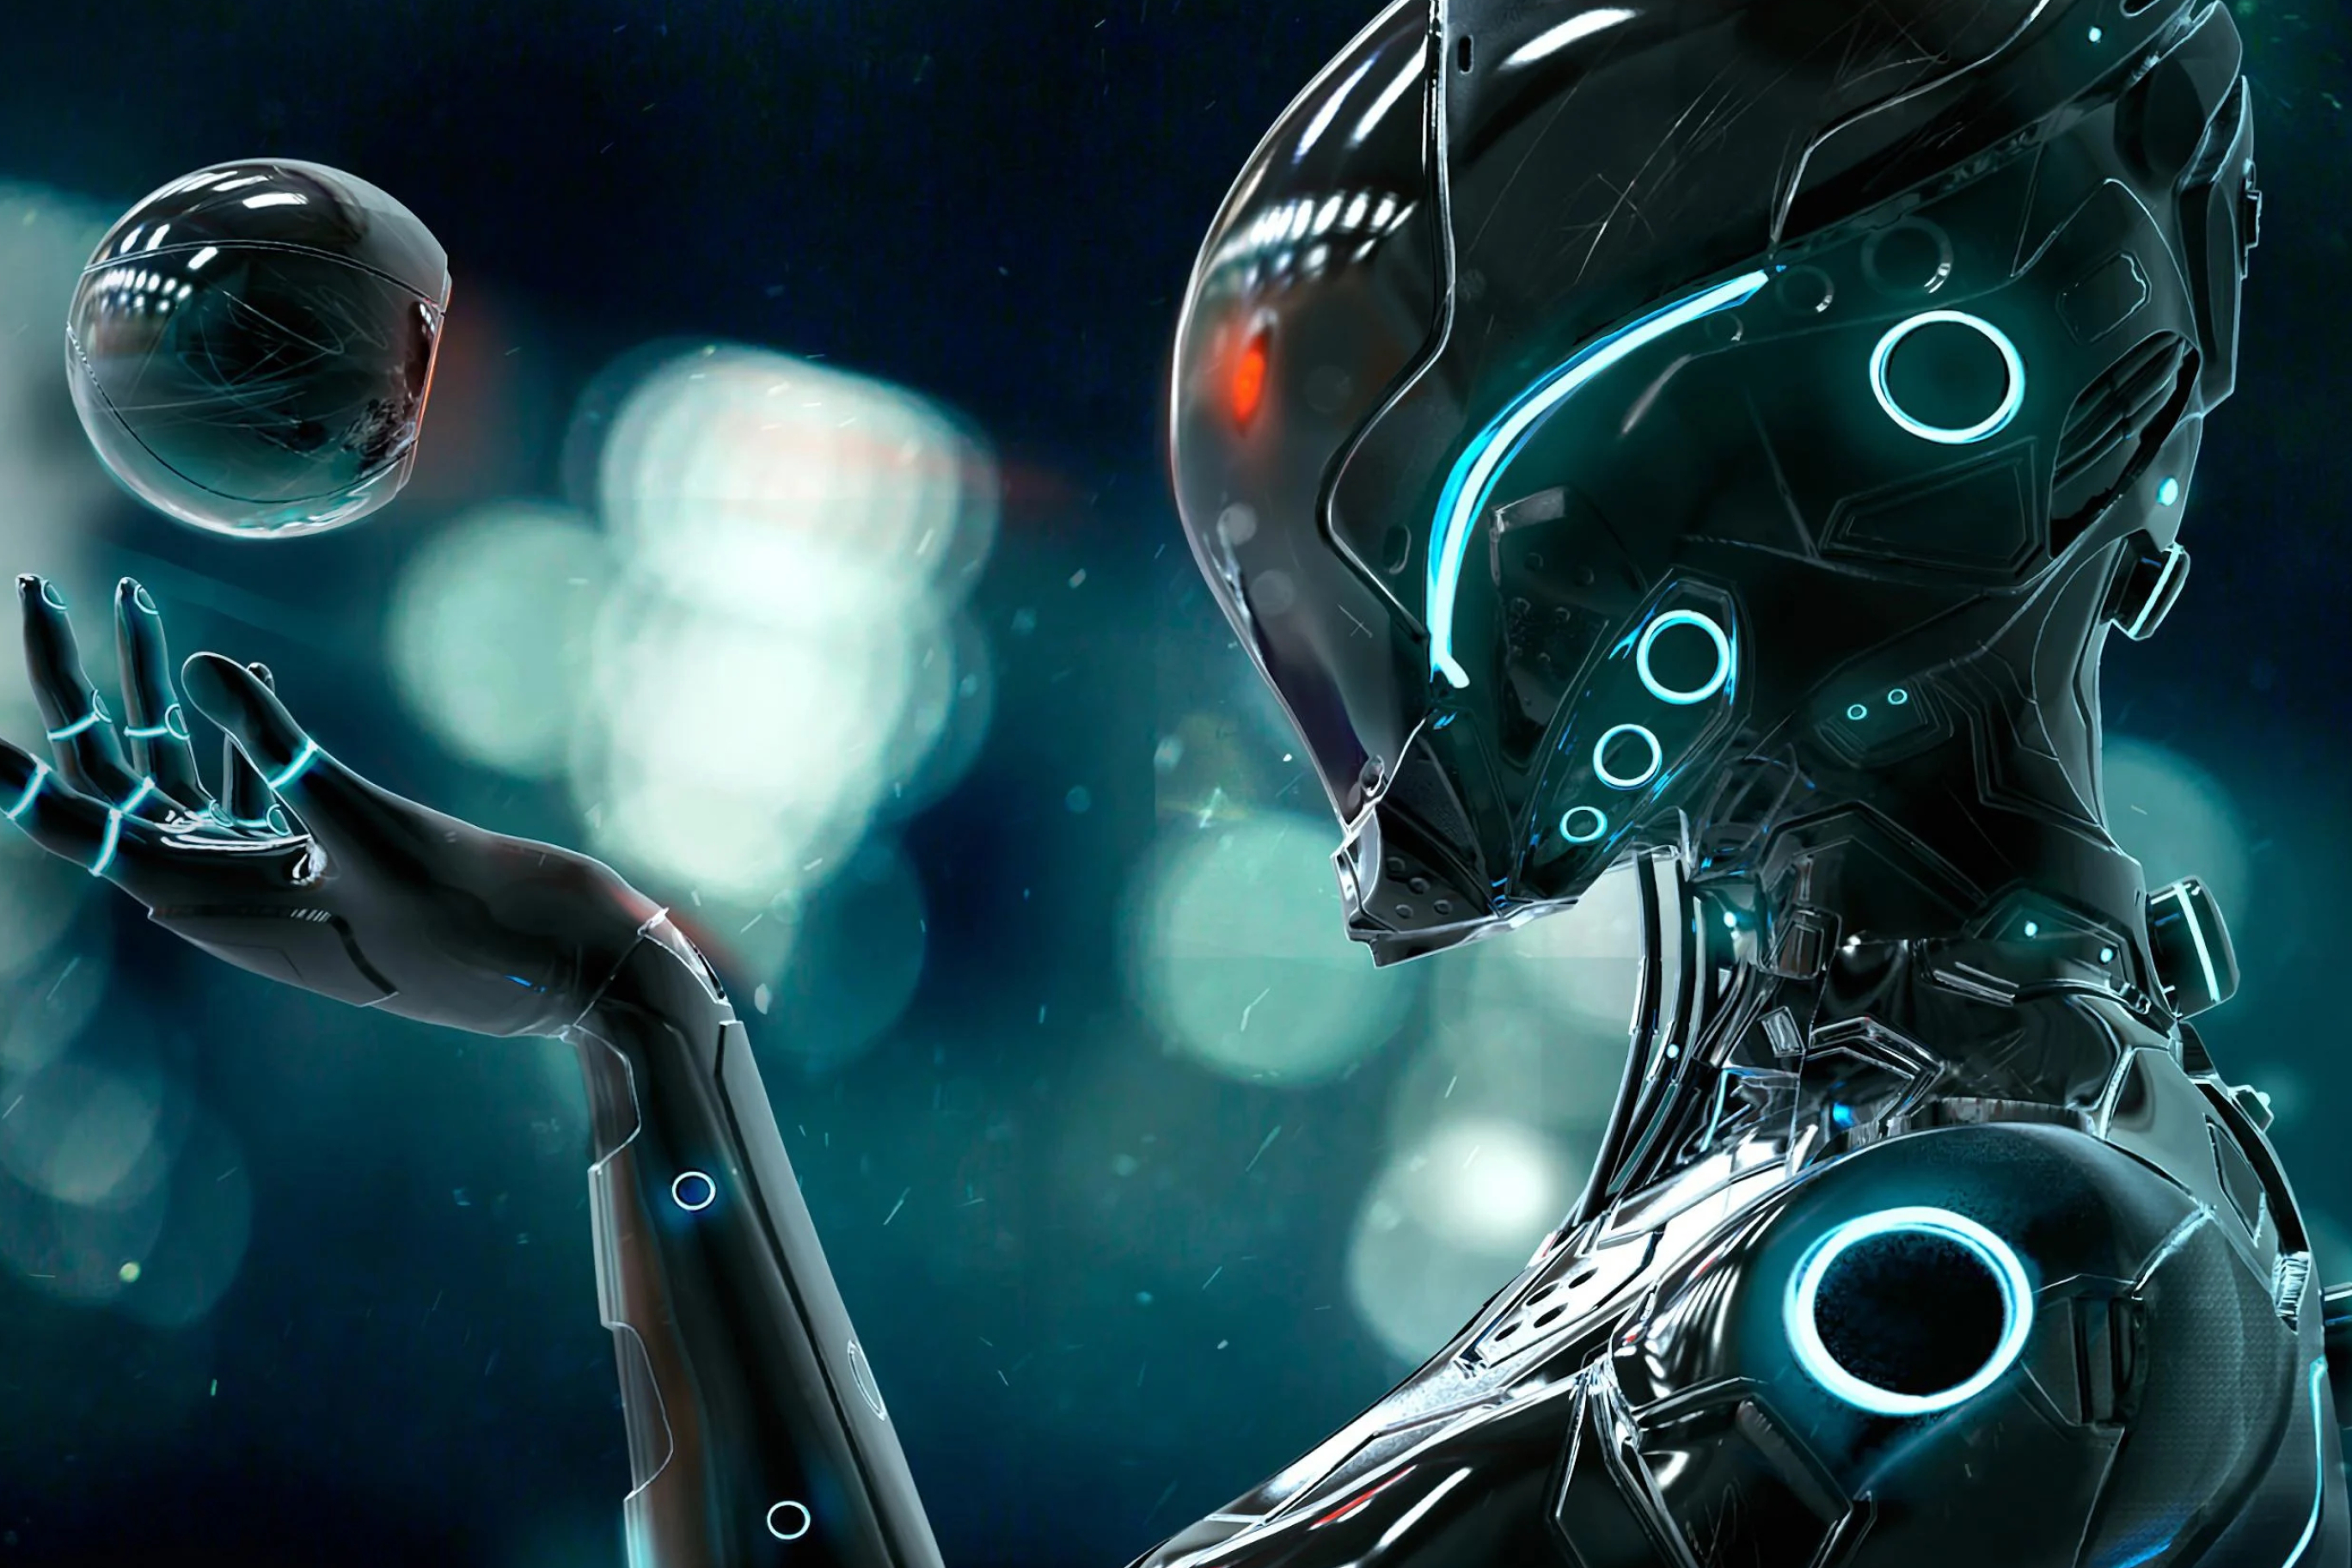 2736x1824 Future Robot Wallpapers Top Free Future Robot Backgrounds